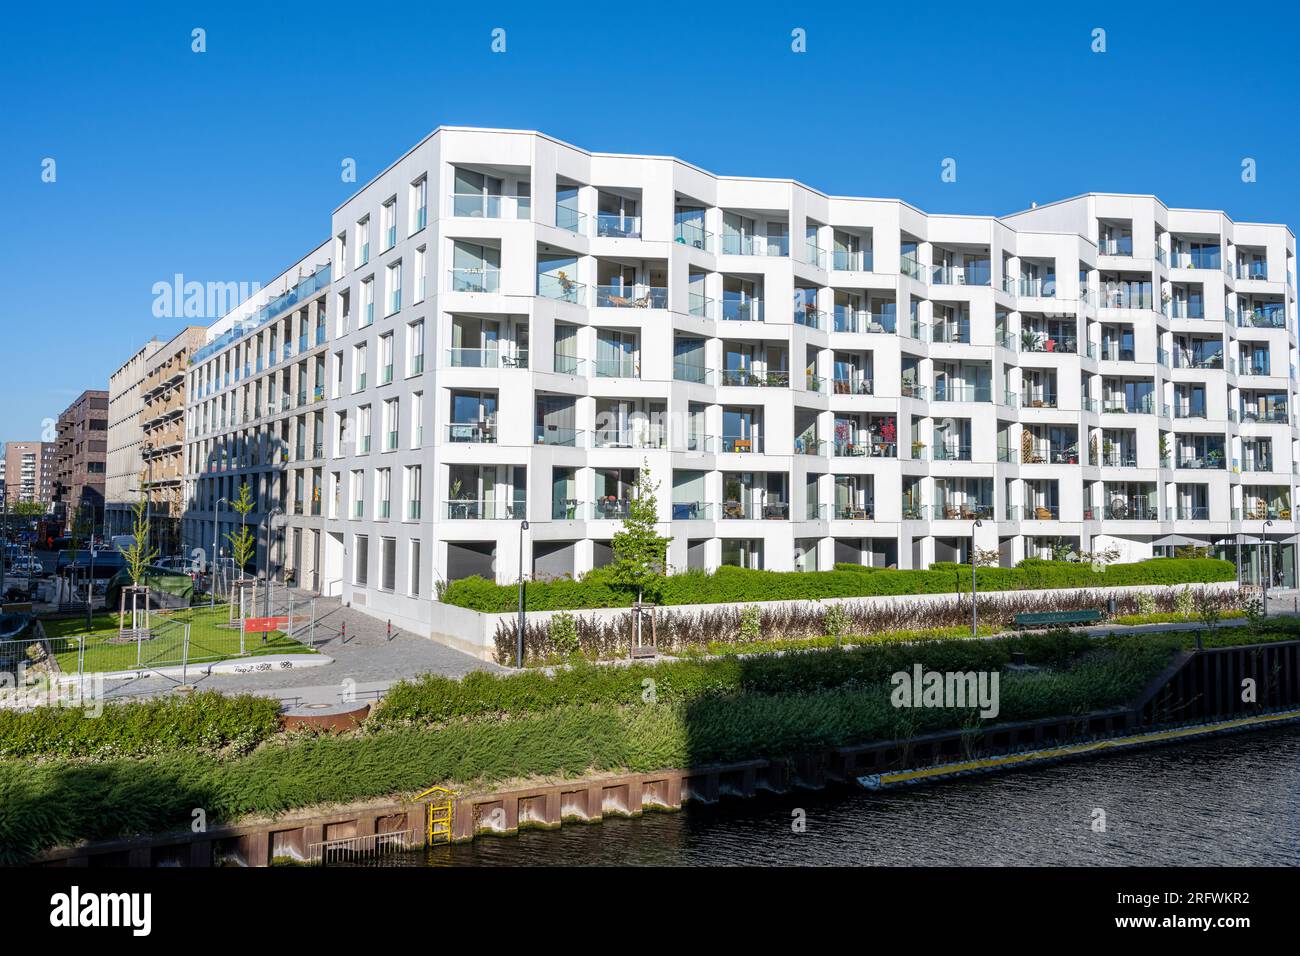 Modern apartment buildings at the waterside seen in Berlin, Germany Stock Photo